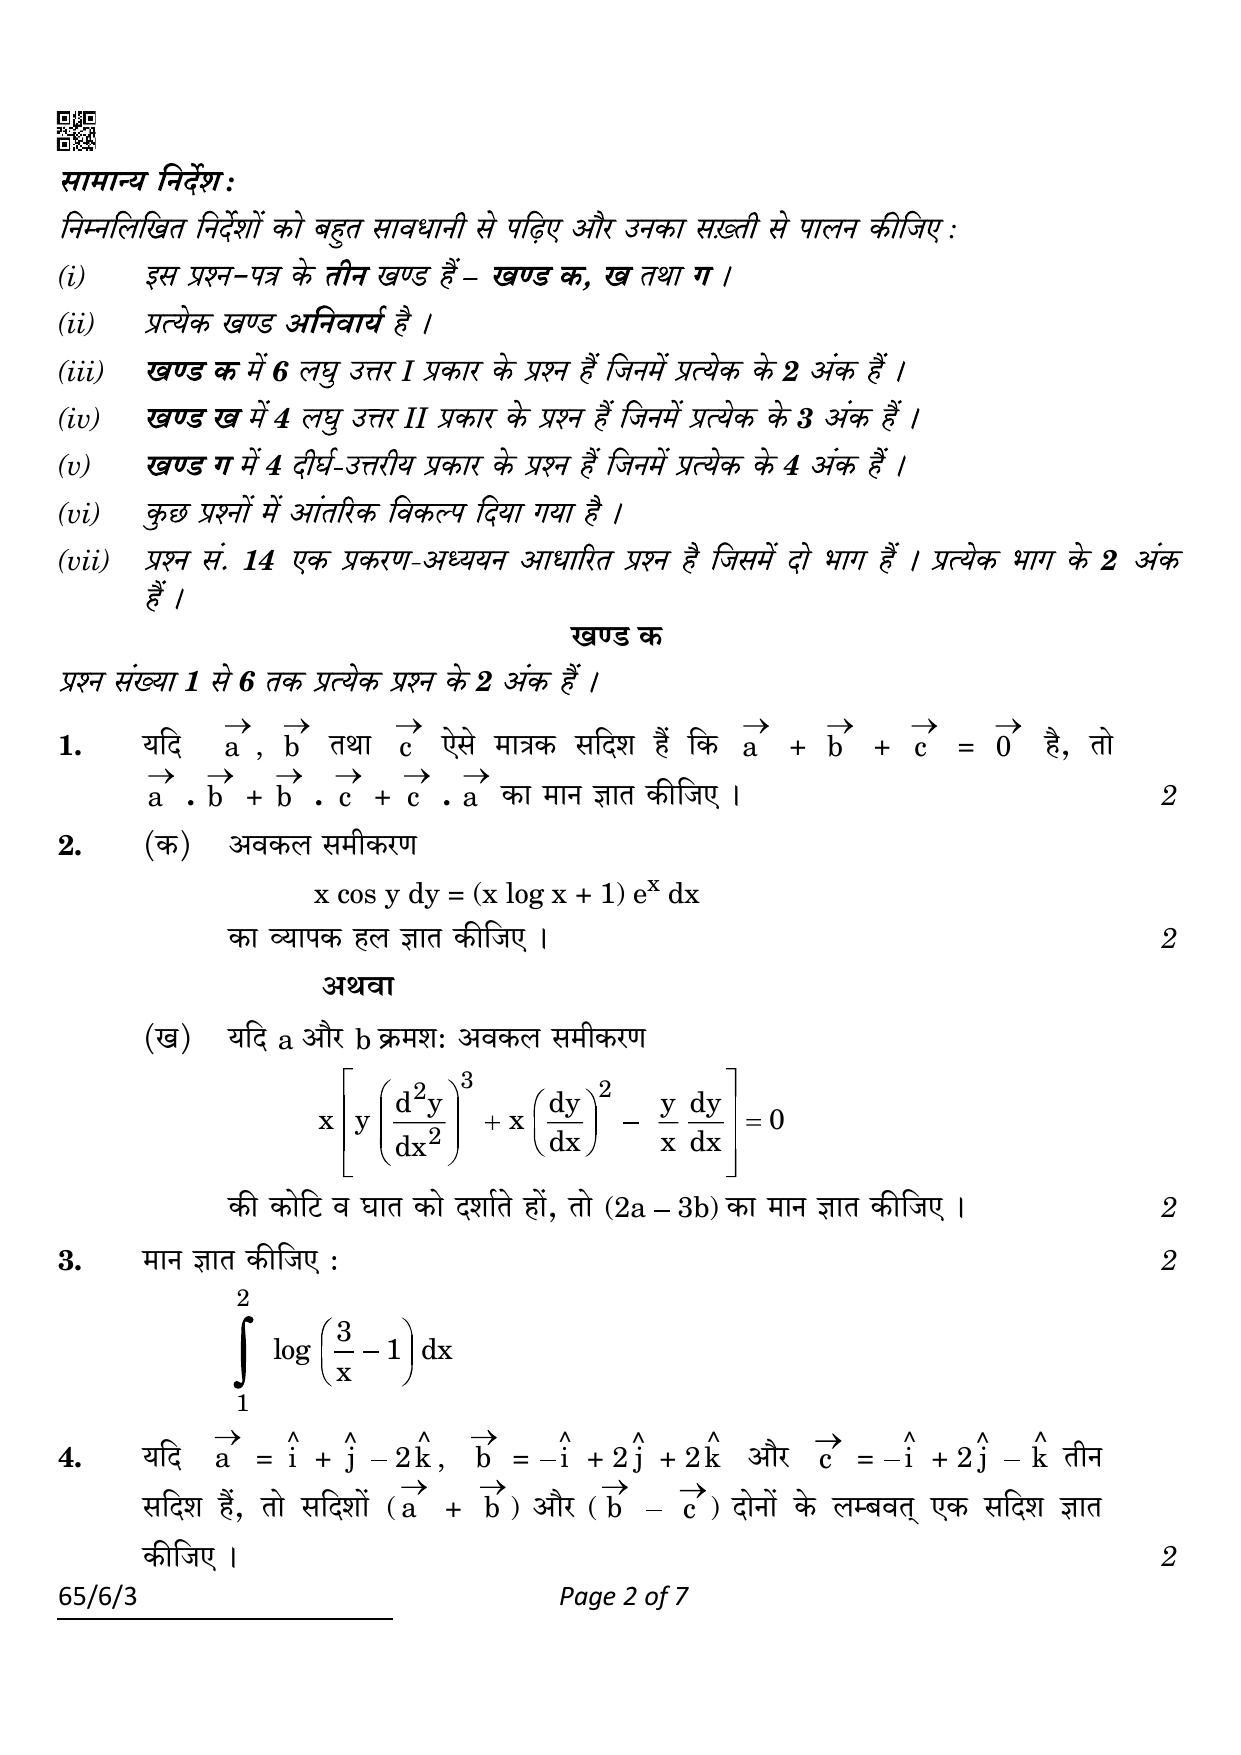 CBSE Class 12 65-6-3 Maths 2022 Compartment Question Paper - Page 2